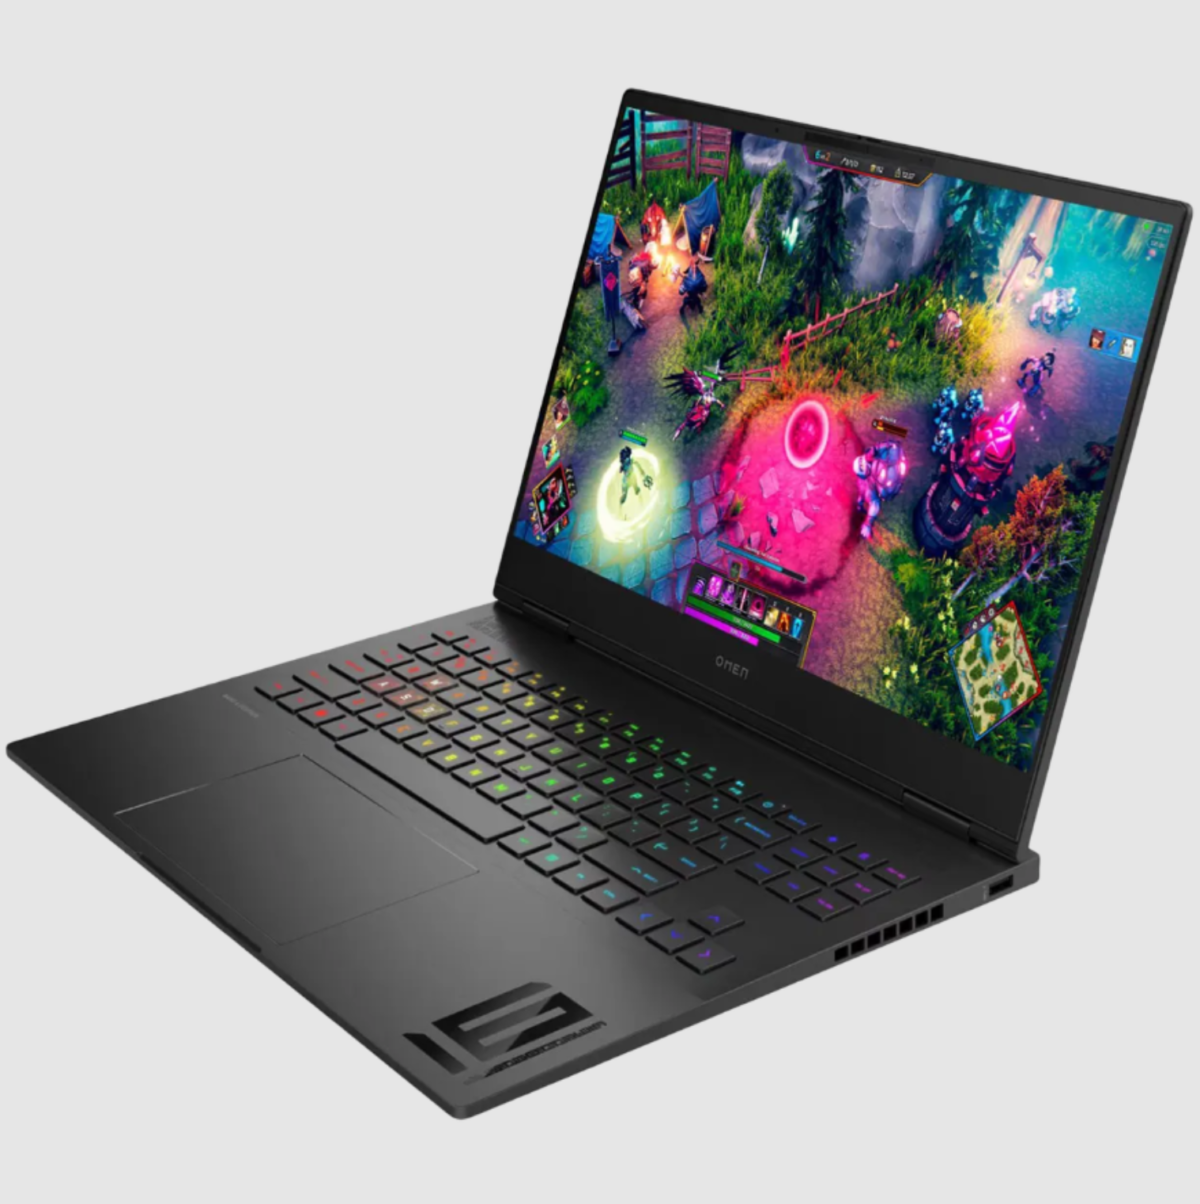 HP OMEN wf1026TX Gaming Laptop Launched in India ( 14th Gen Intel Core i7-14700HX / RTX 4070 )